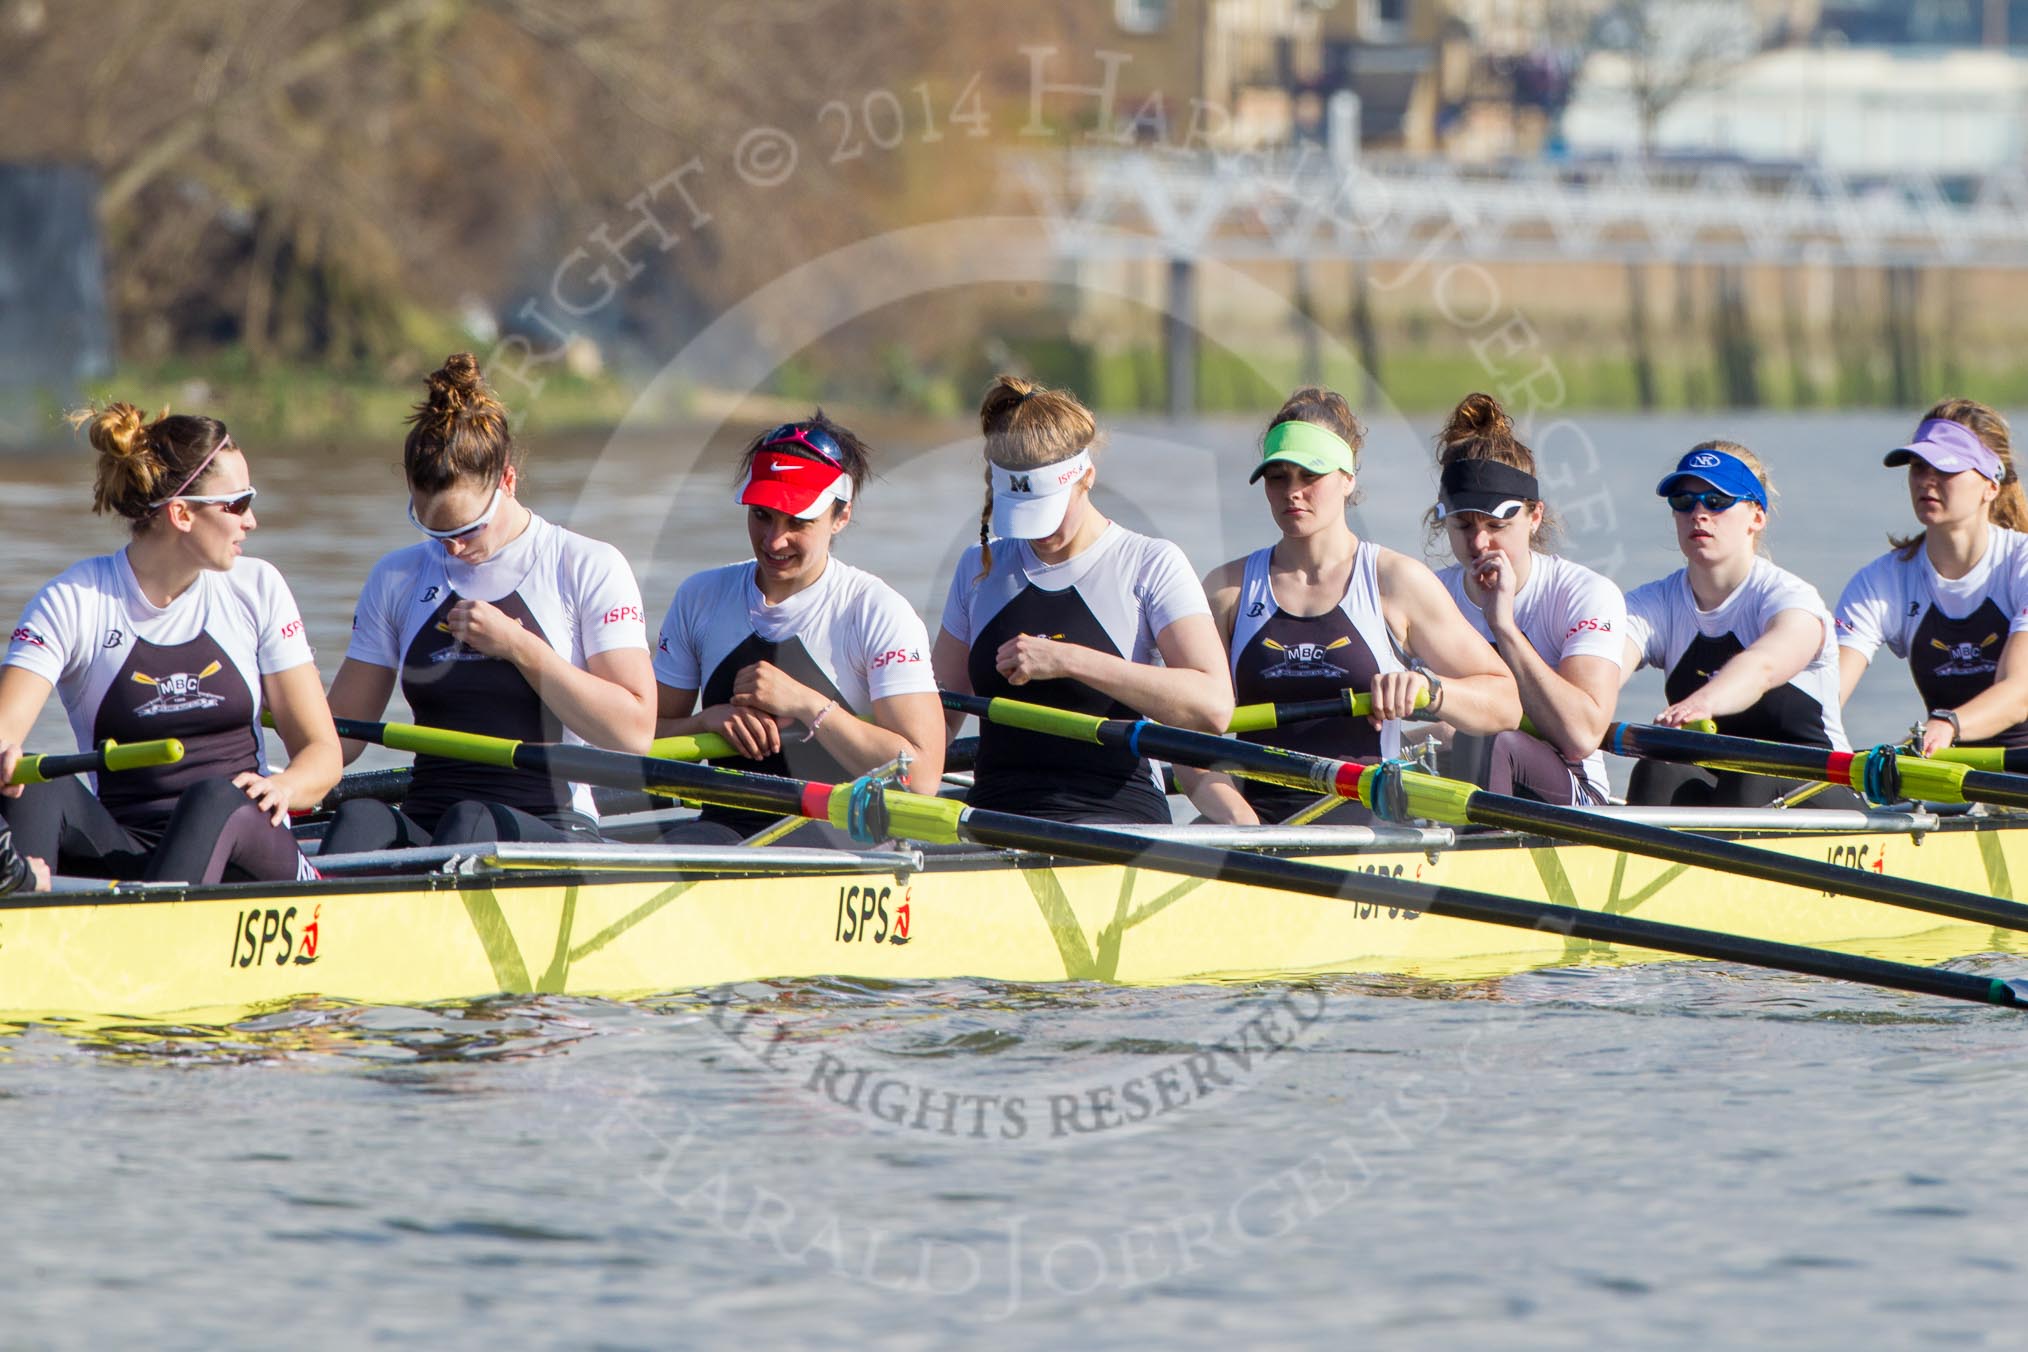 The Boat Race season 2014 - fixture OUWBC vs Molesey BC.




on 01 March 2014 at 13:06, image #157